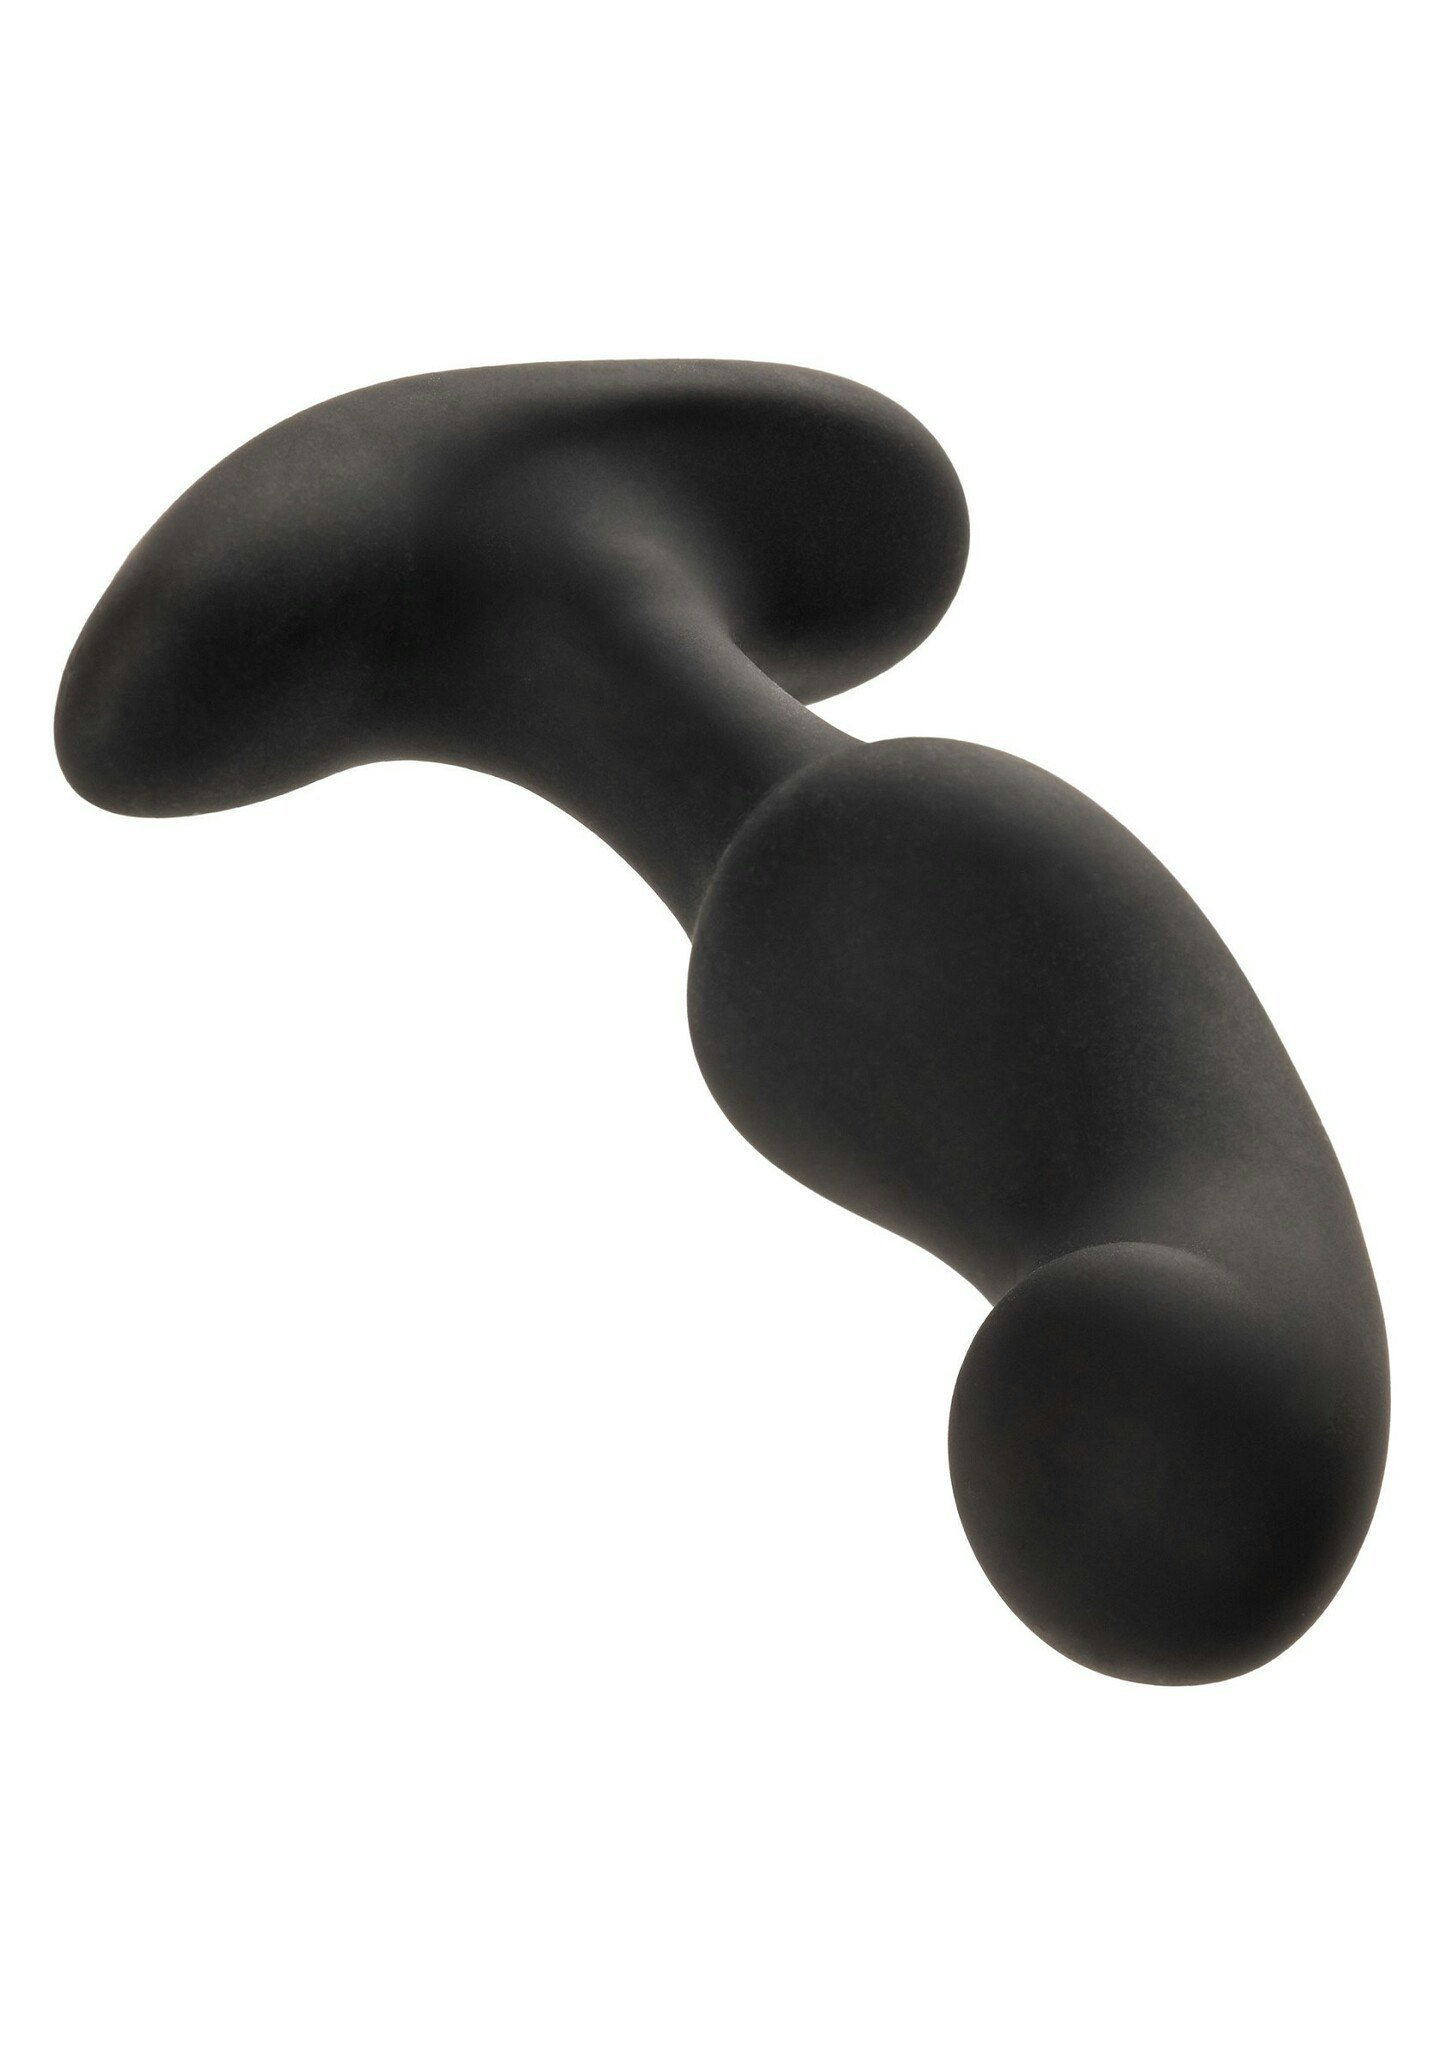 CalExotics - Rechargeable Curved Probe